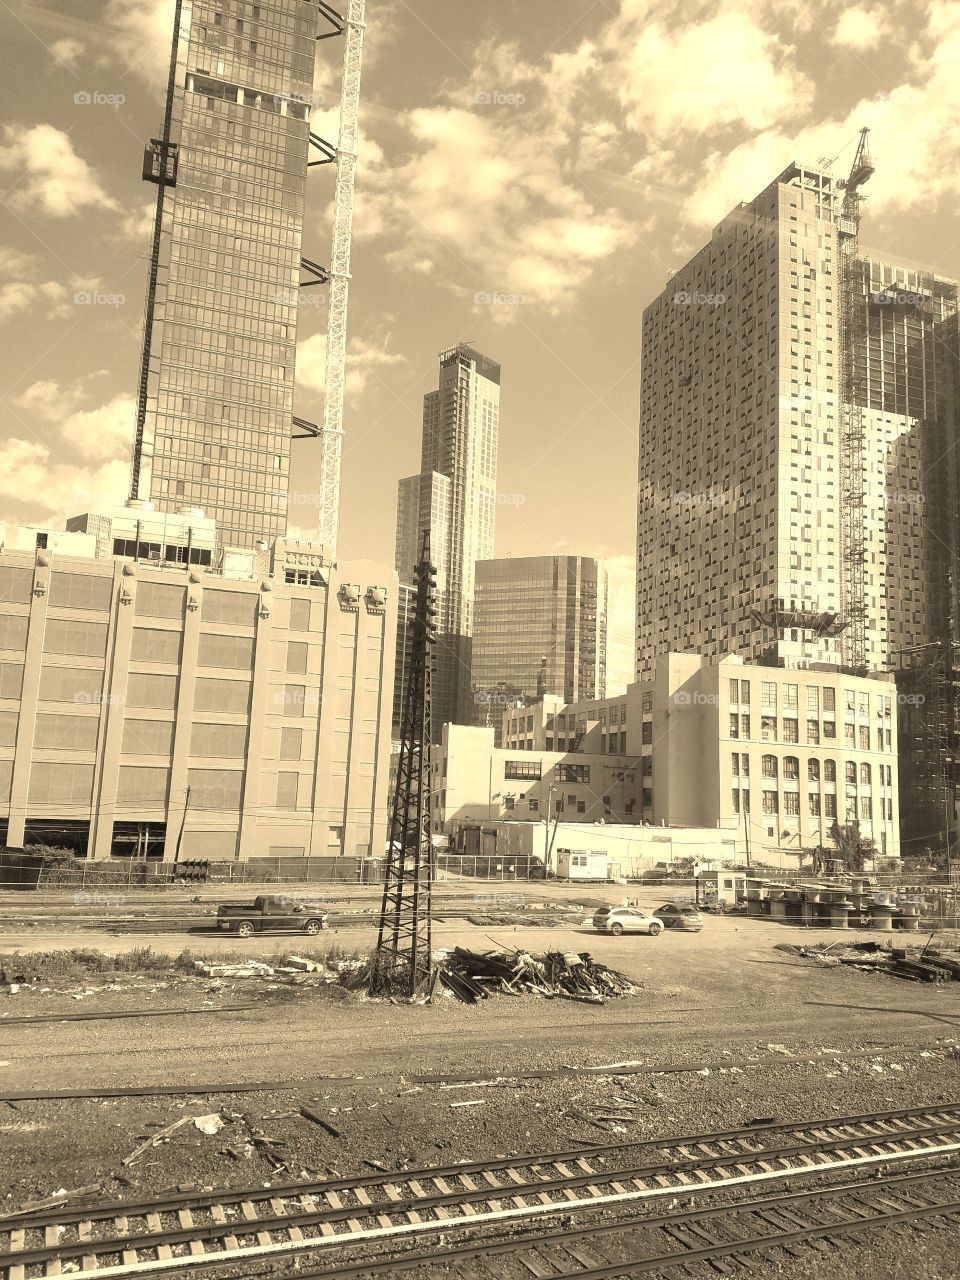 View of Long Island City train tracks taken aboard the Long Island Rail Road (LIRR) morning commute into Manhattan from Queens. Sepia Filter. June 2017.